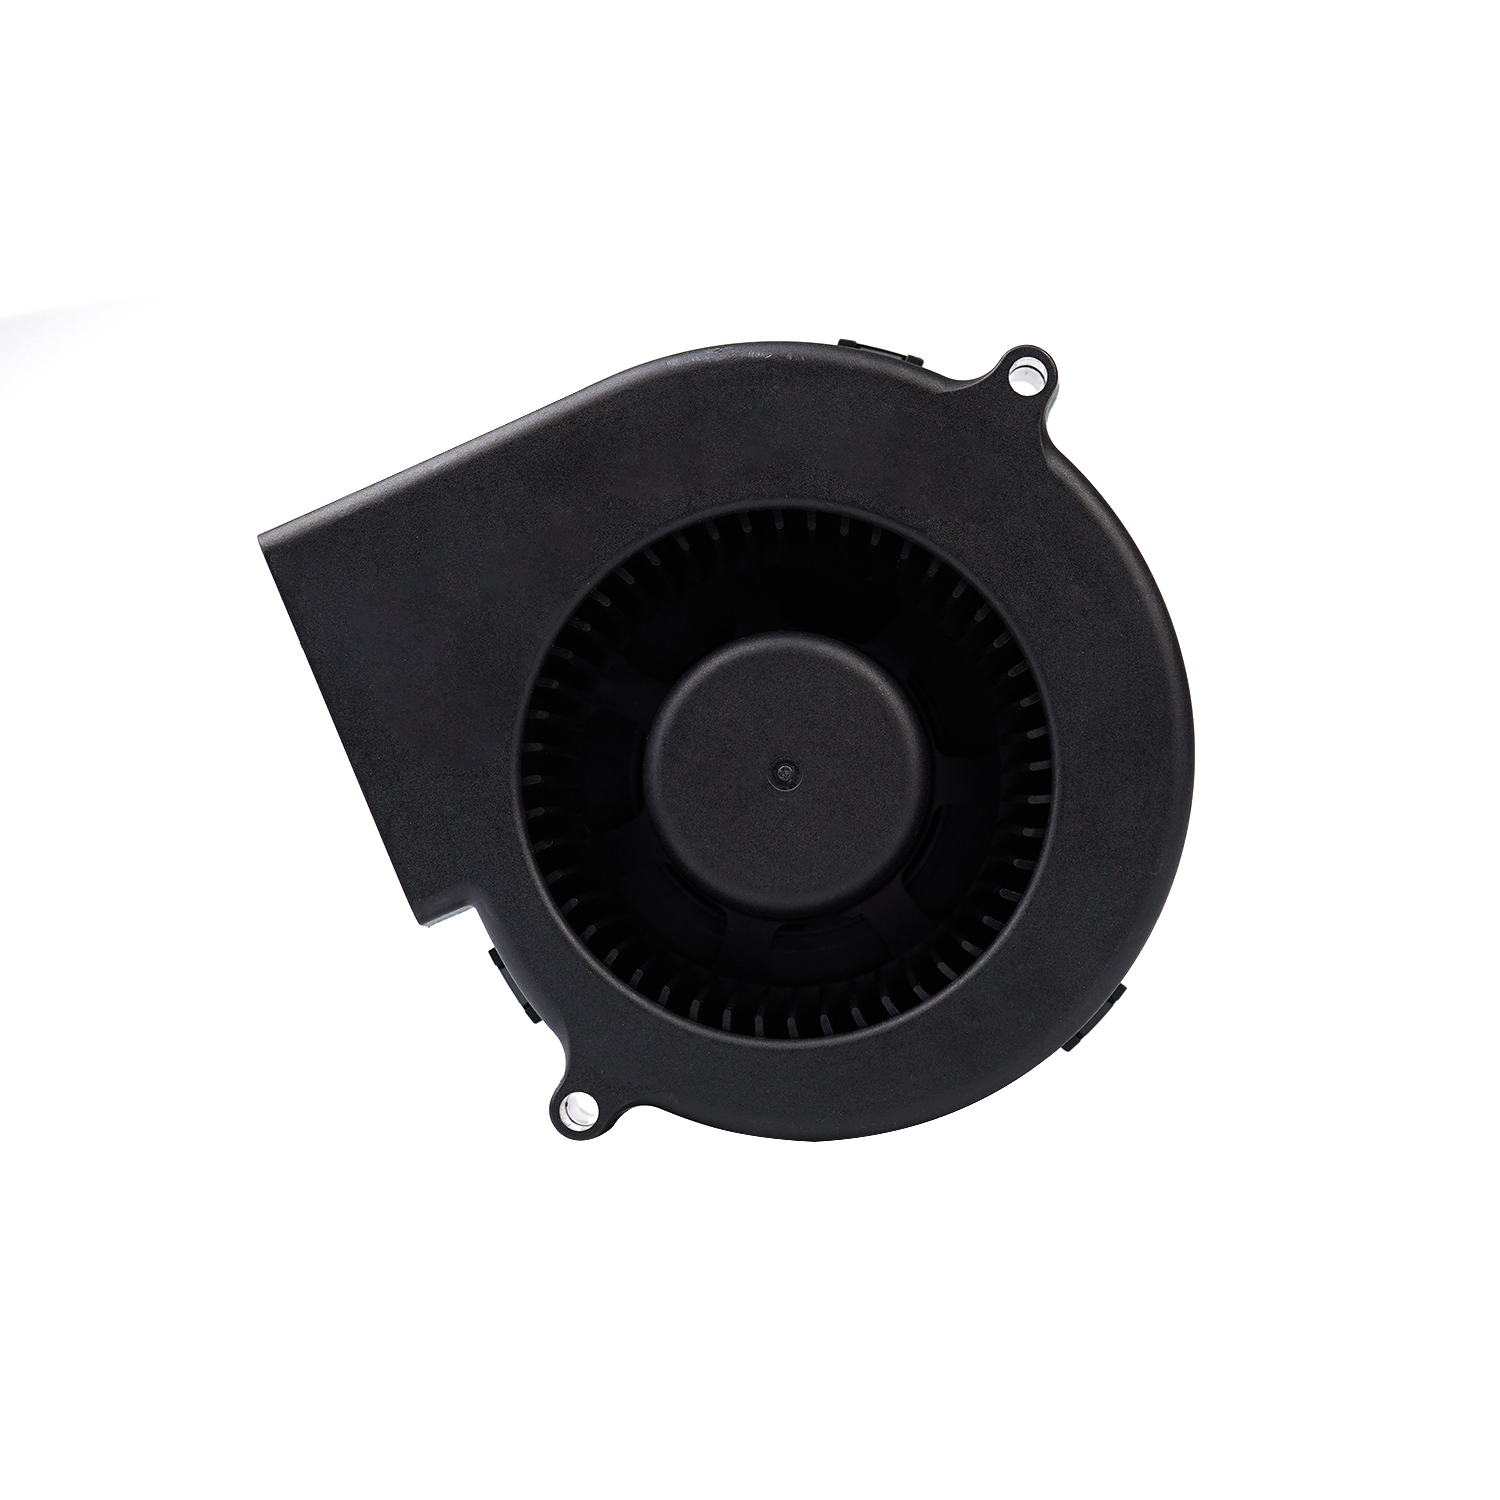 24v Air DC Blower For Industrial